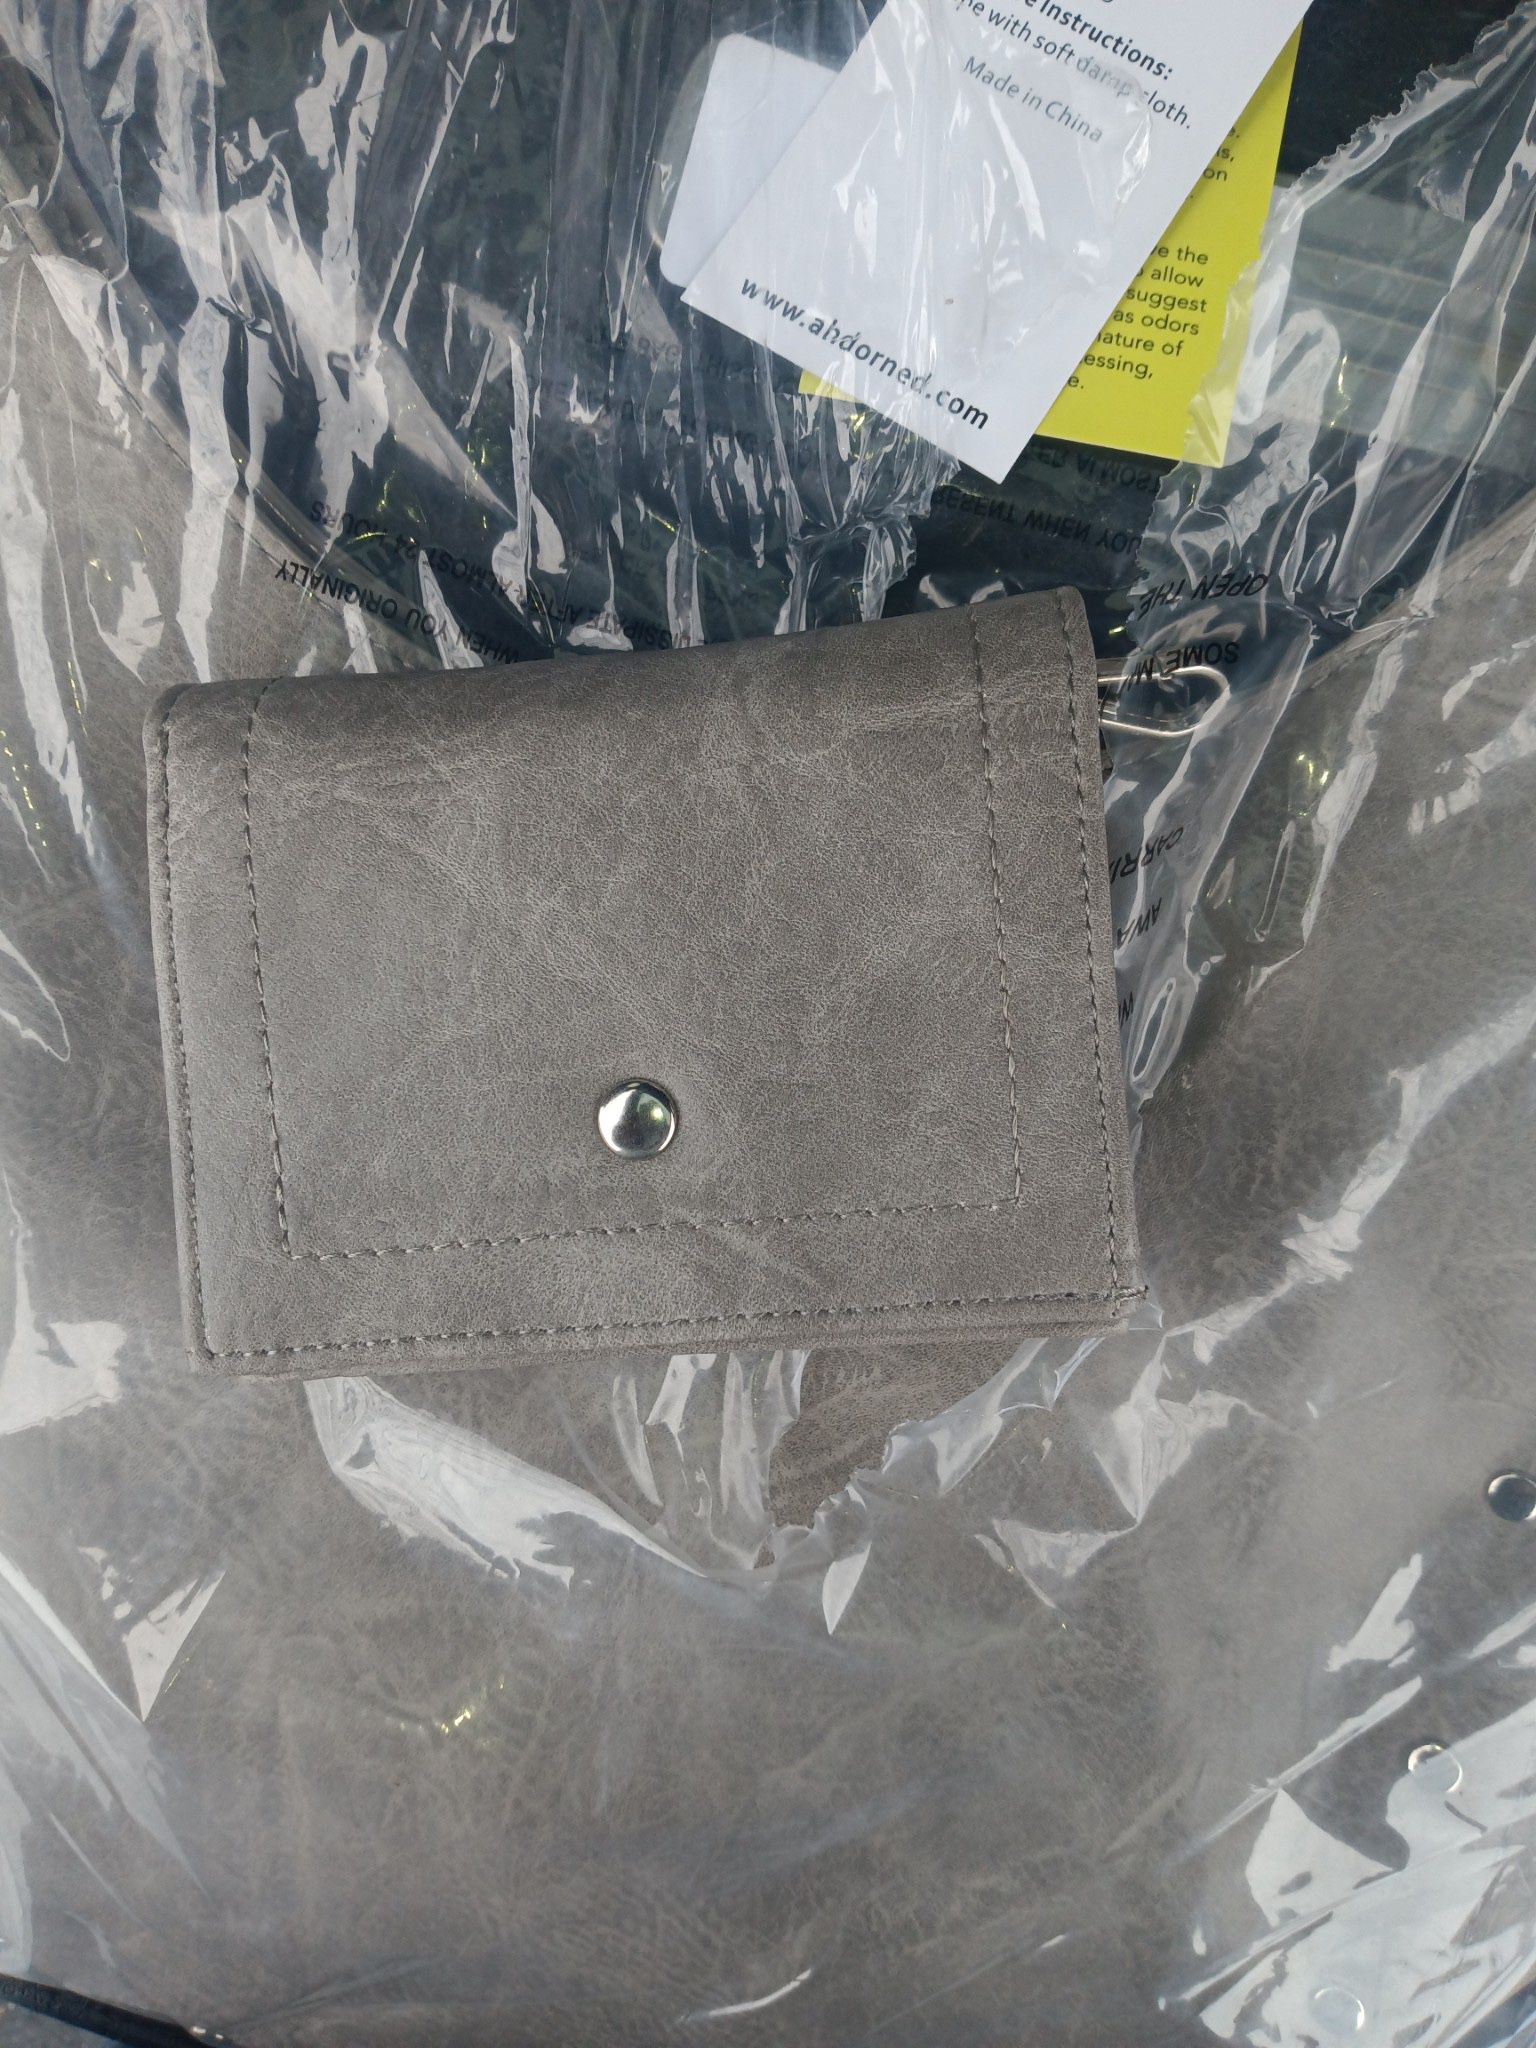 AH!DORNED Purse And Wallet 100% Vegan leather 